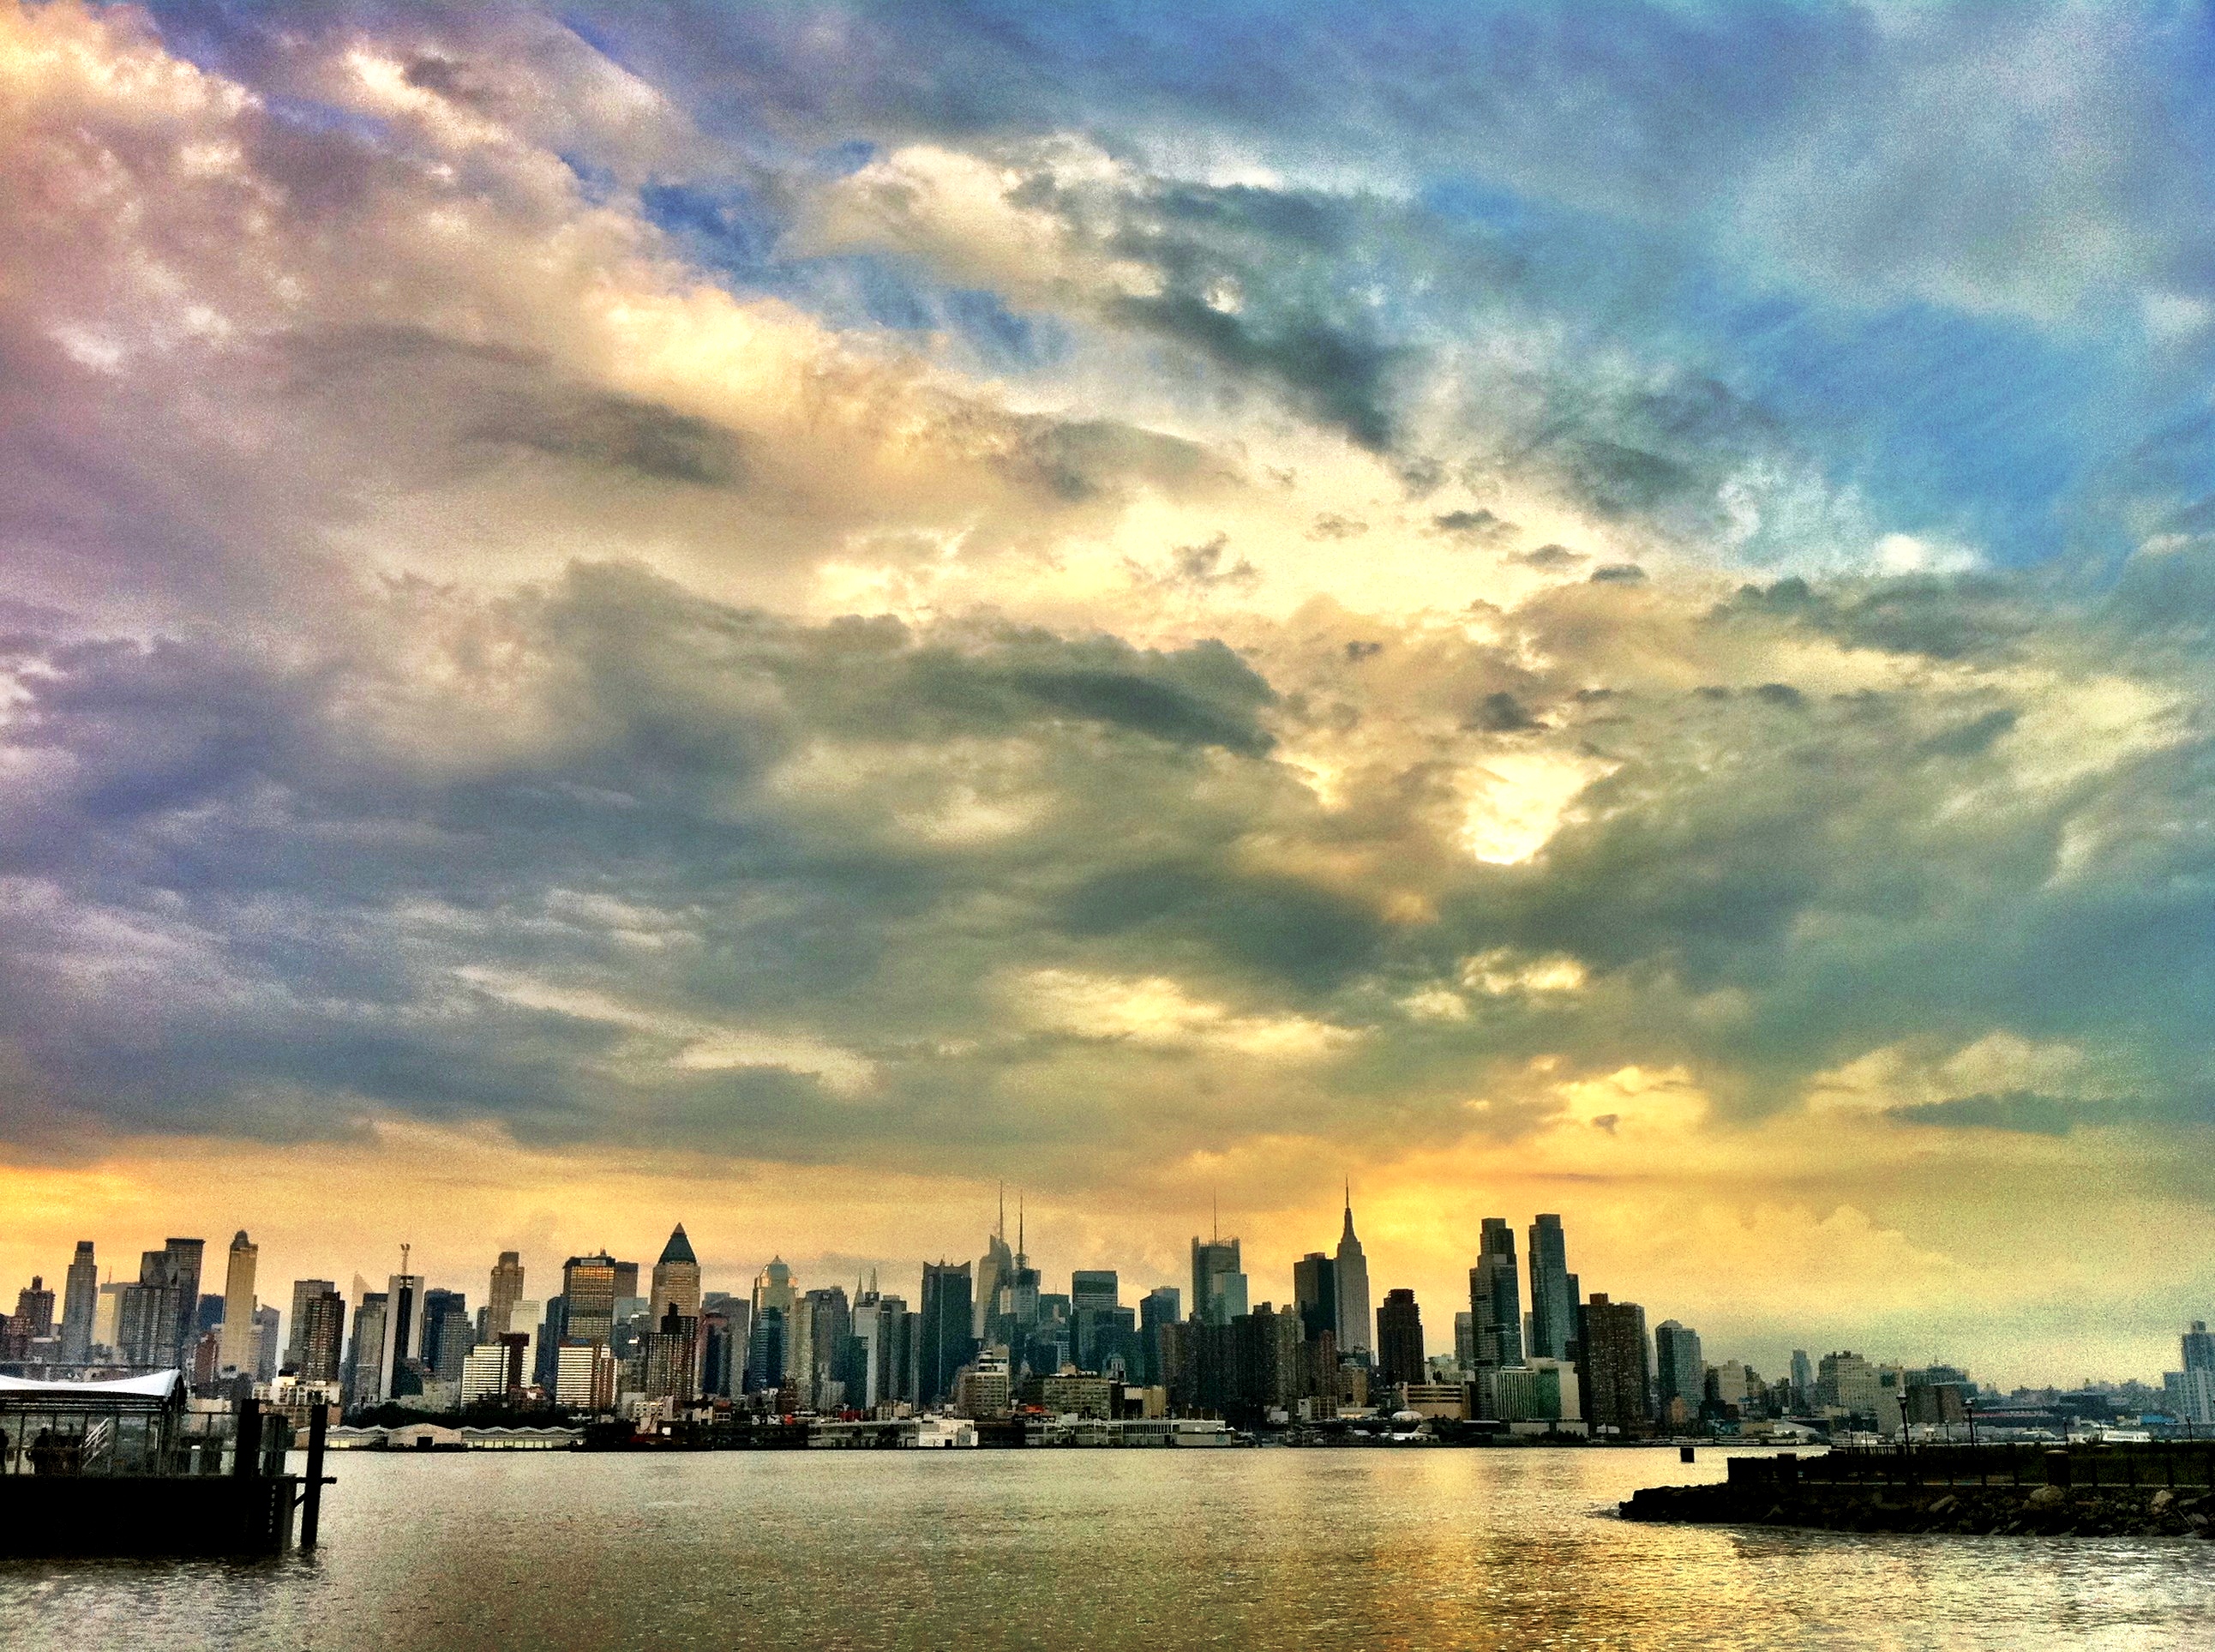 The New York City skyline after a stormy afternoon from Port Imperial, NY Waterway in Weehawken New Jersey